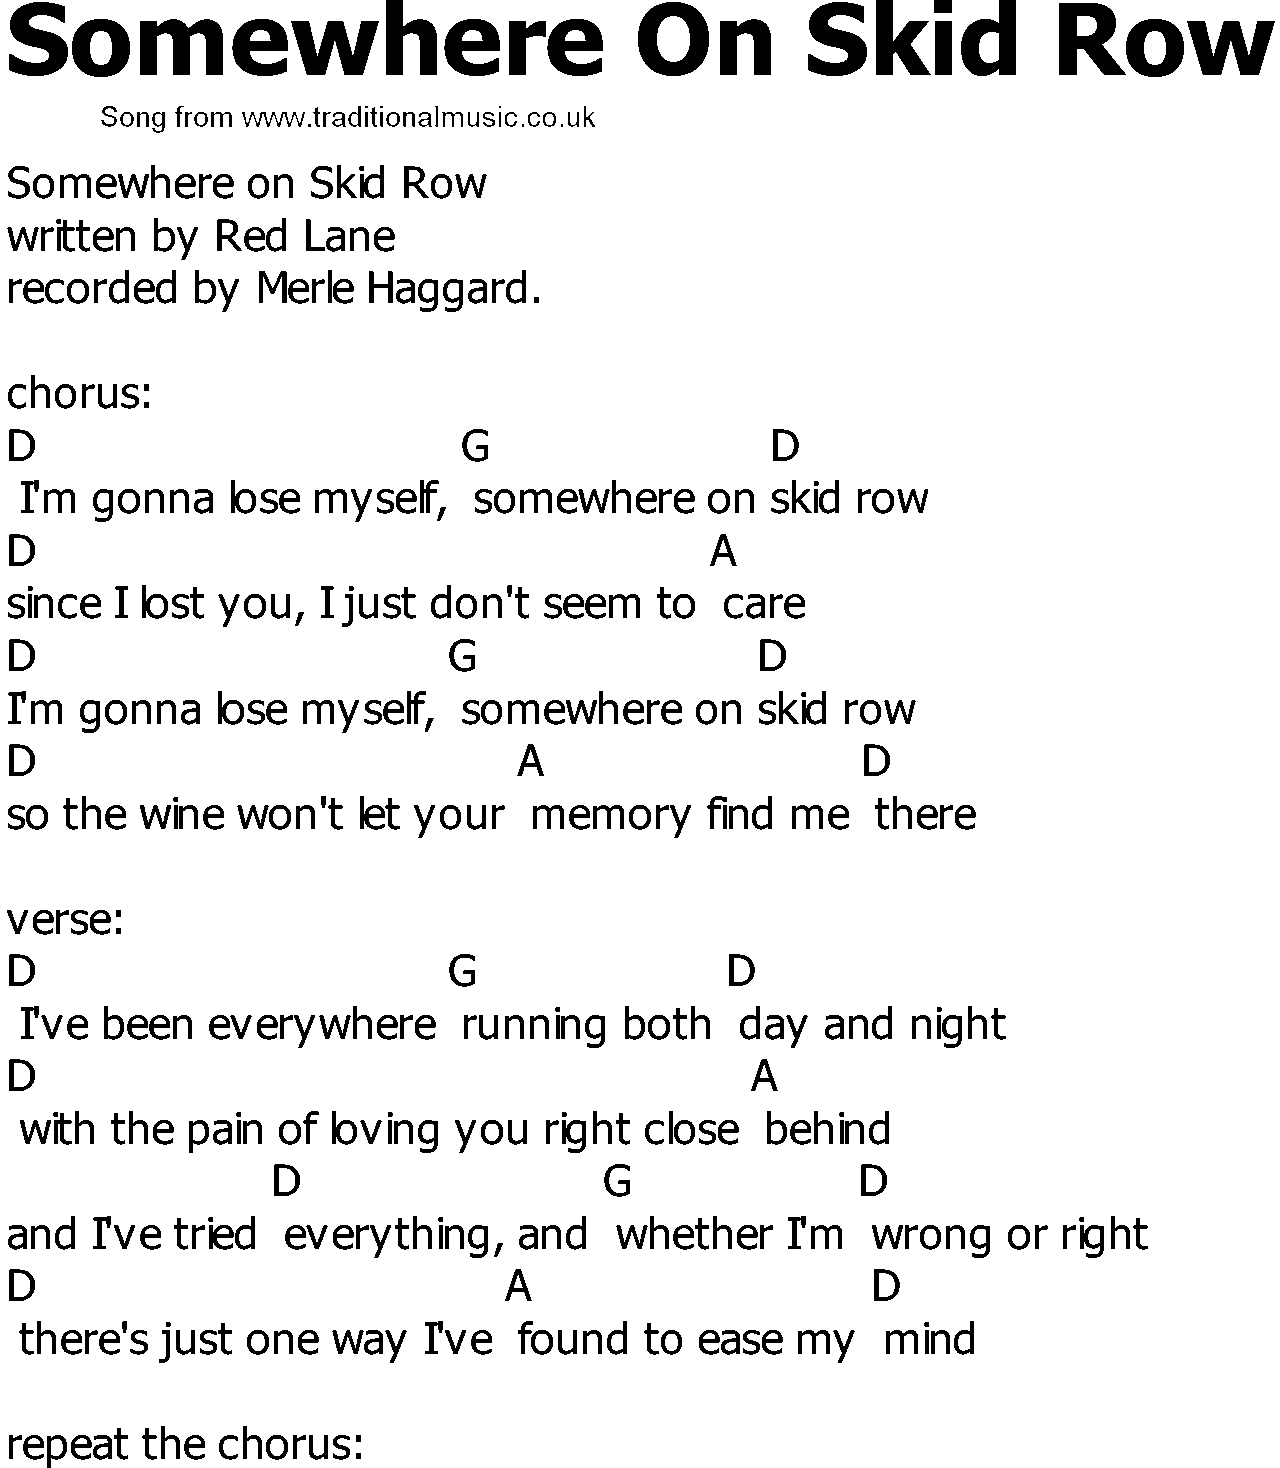 Old Country song lyrics with chords - Somewhere On Skid Row